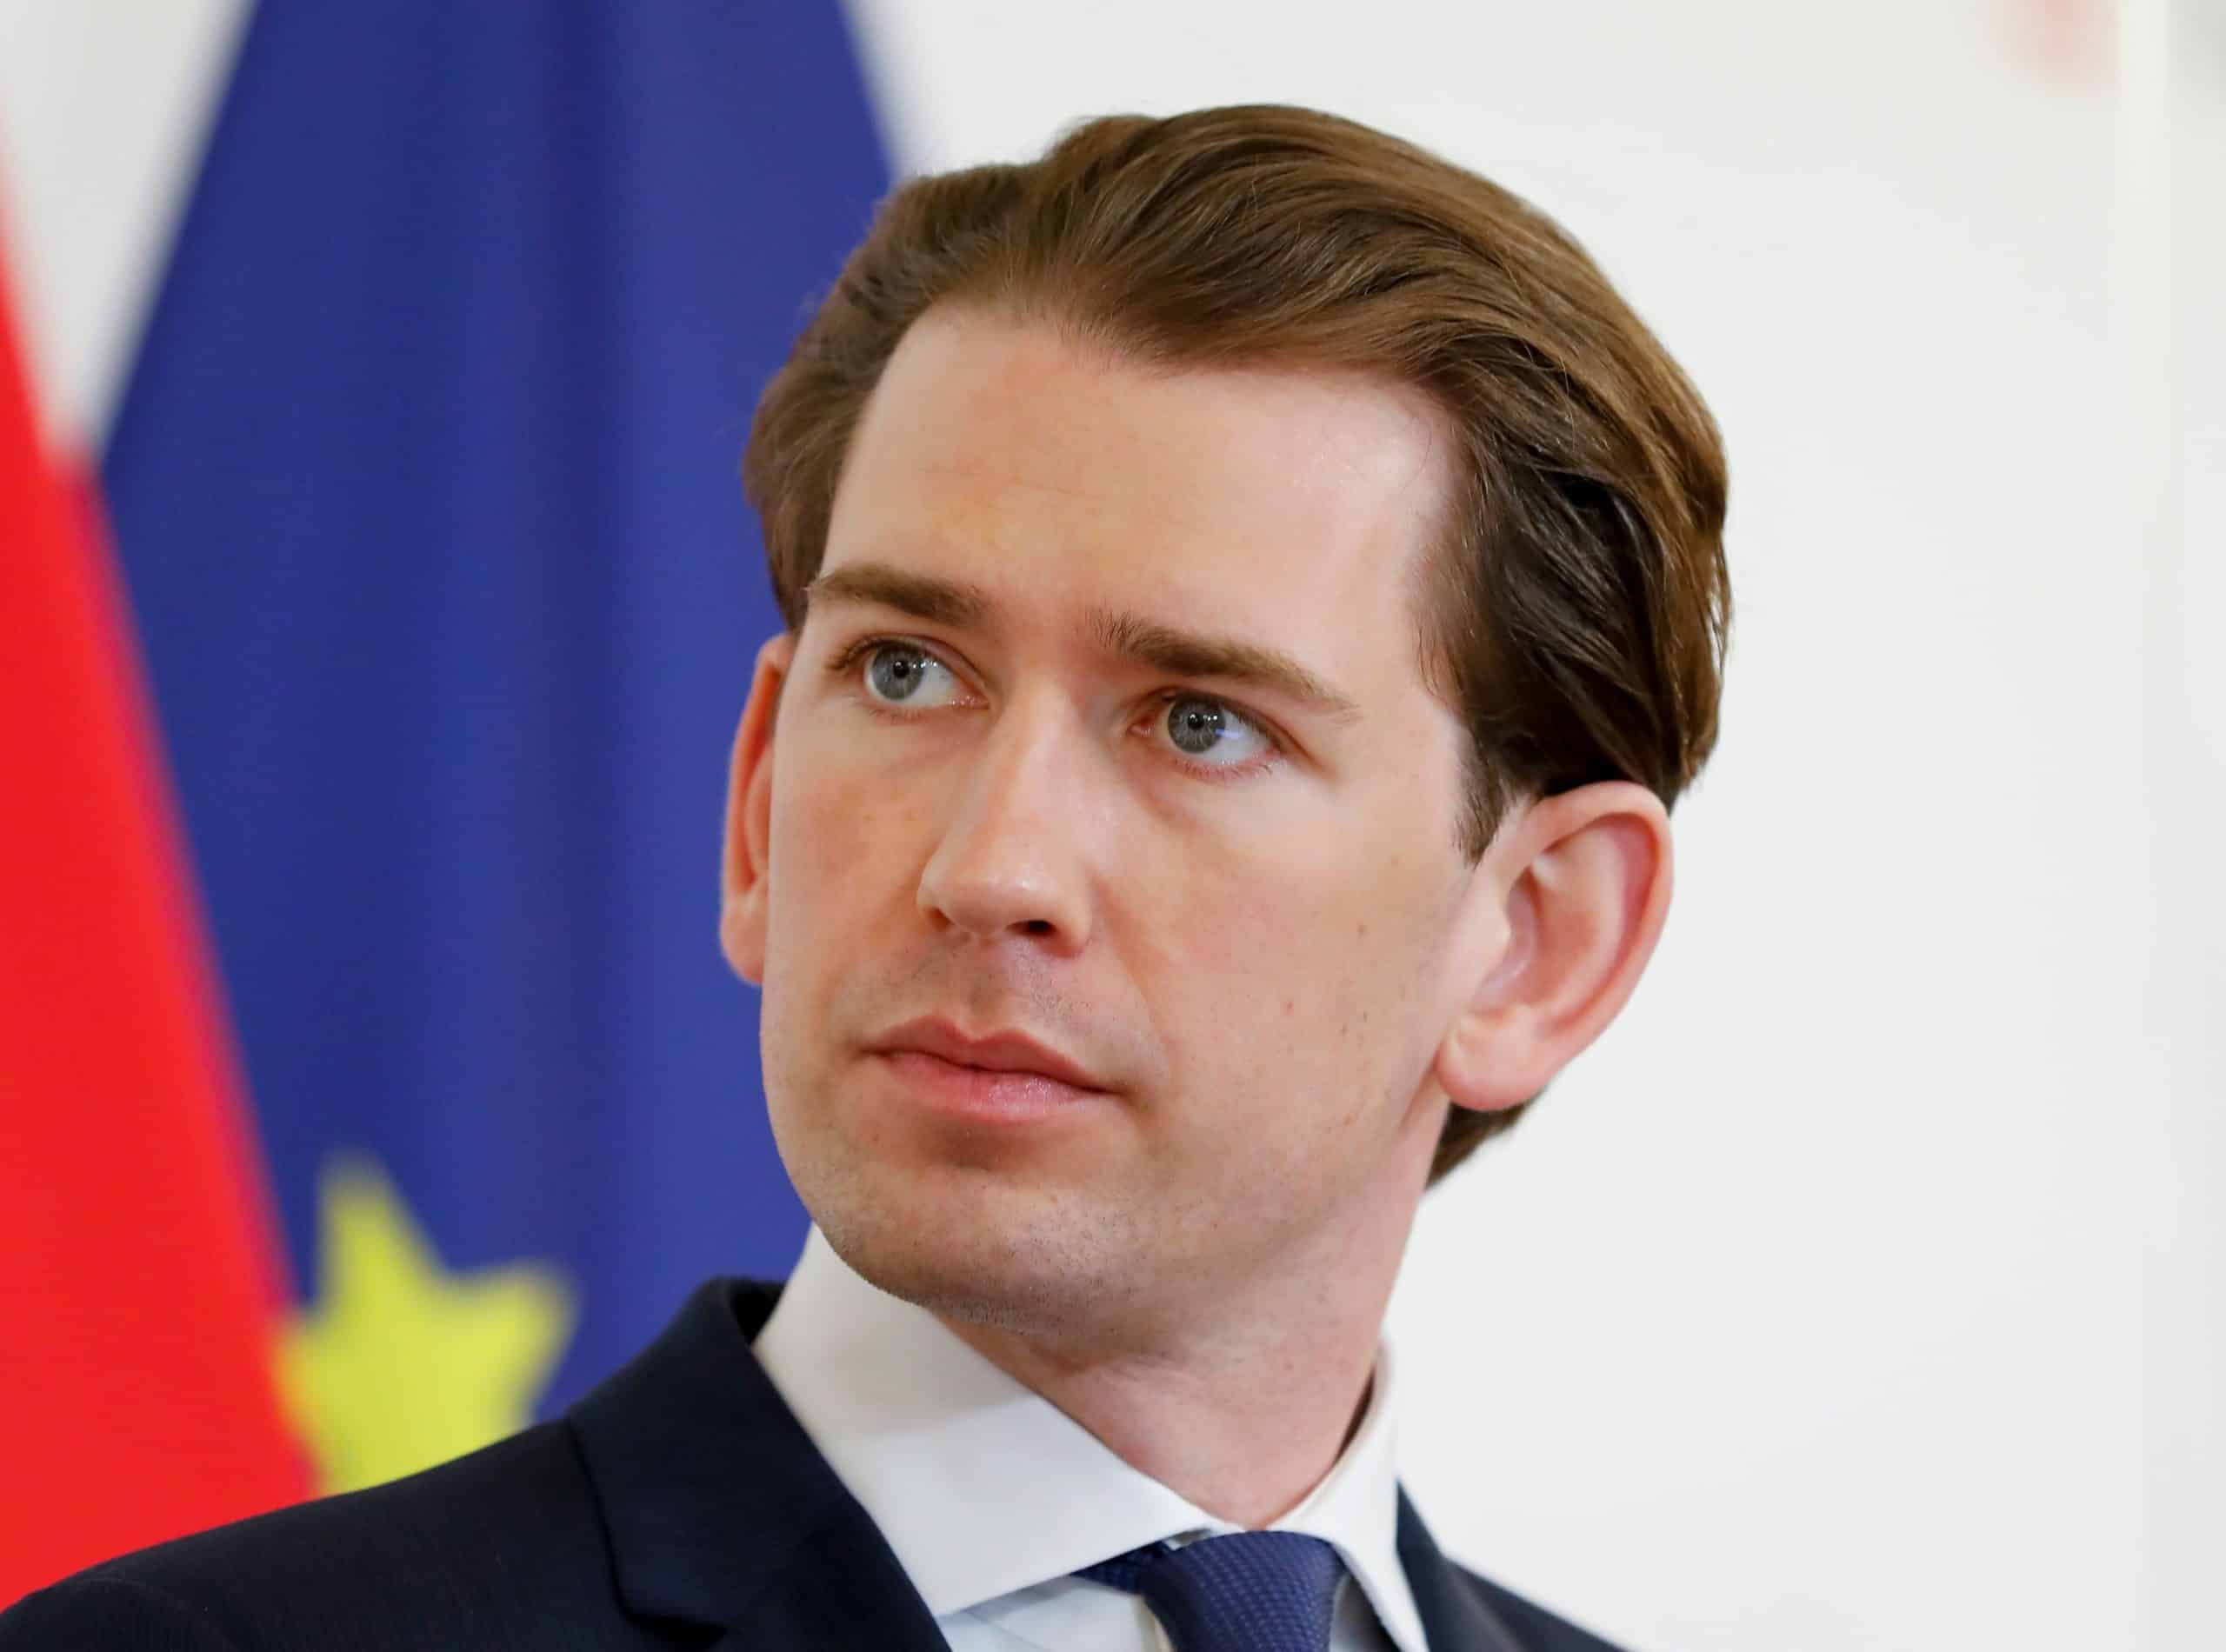 Meanwhile in England: Kurz to quit as Austrian chancellor amid corruption probe